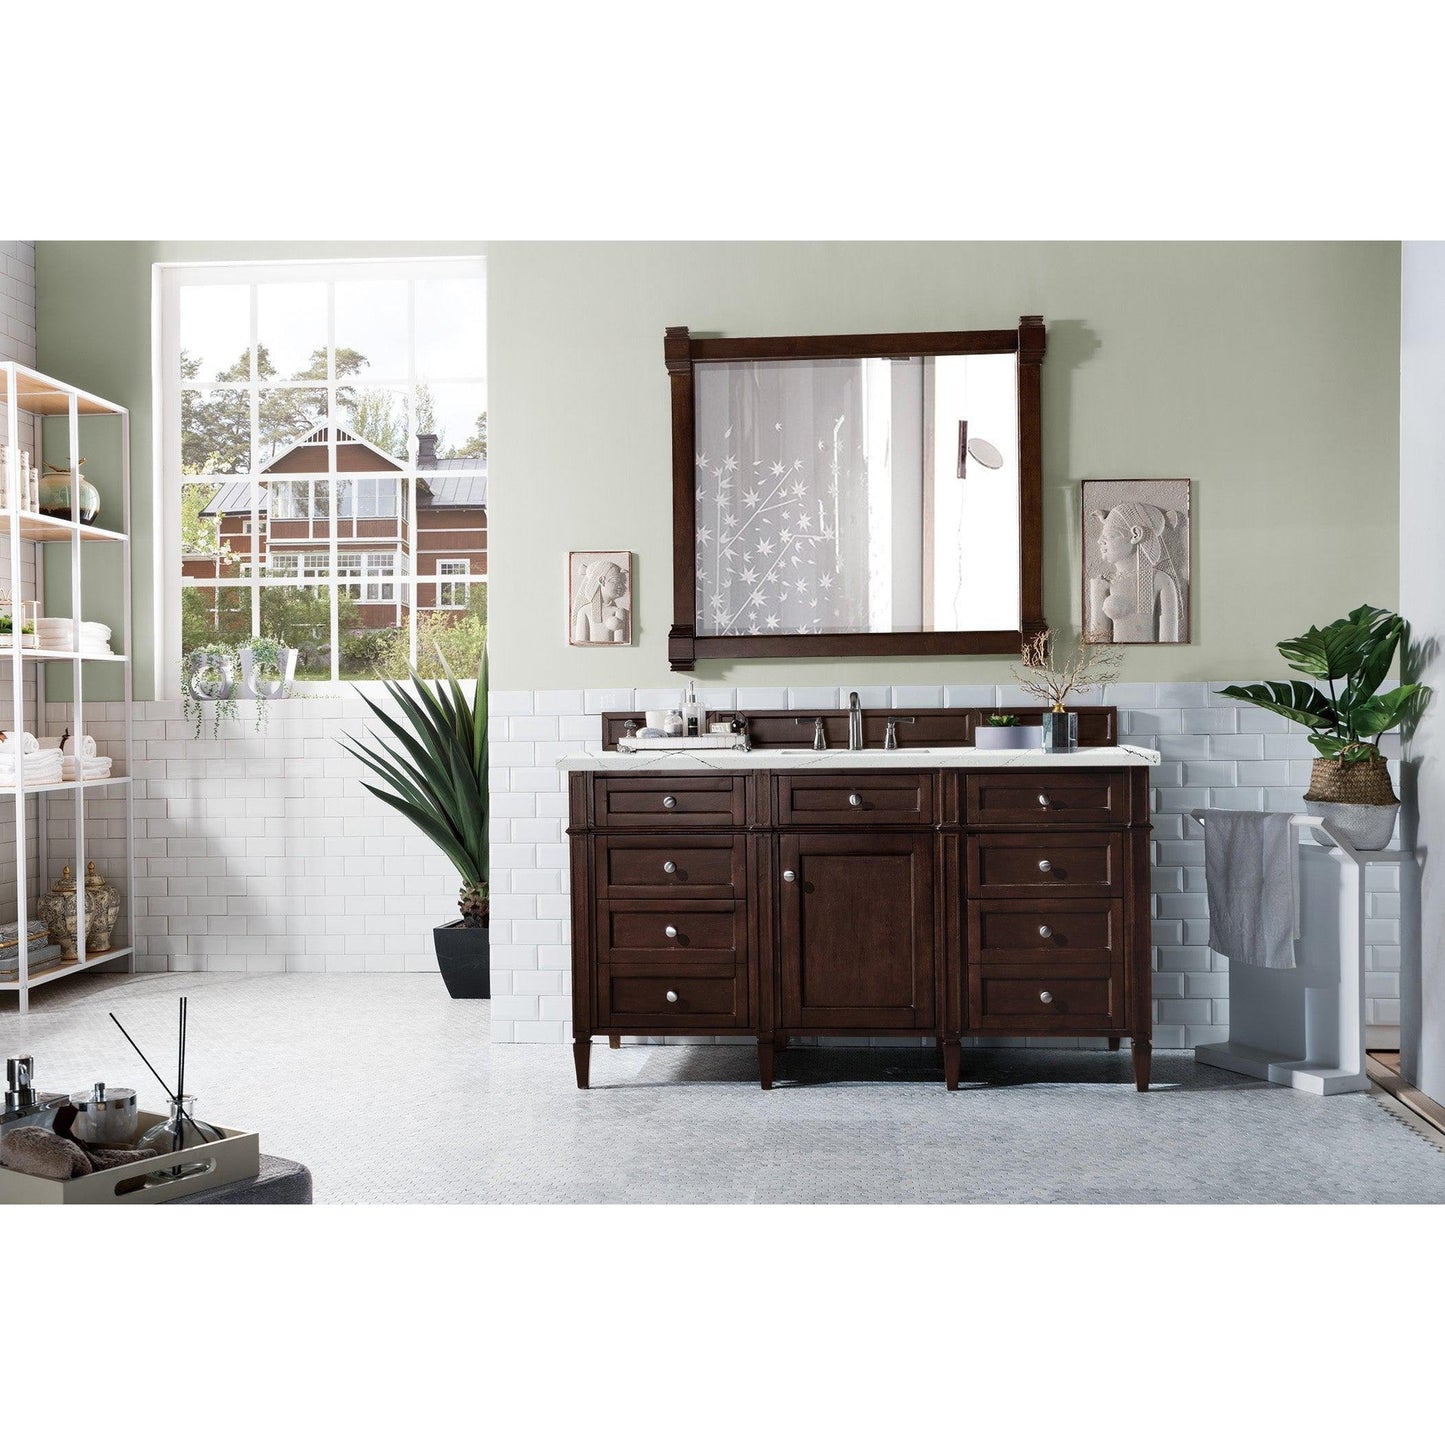 James Martin Vanities Brittany 60" Burnished Mahogany Single Vanity With 3cm Ethereal Noctis Quartz Top